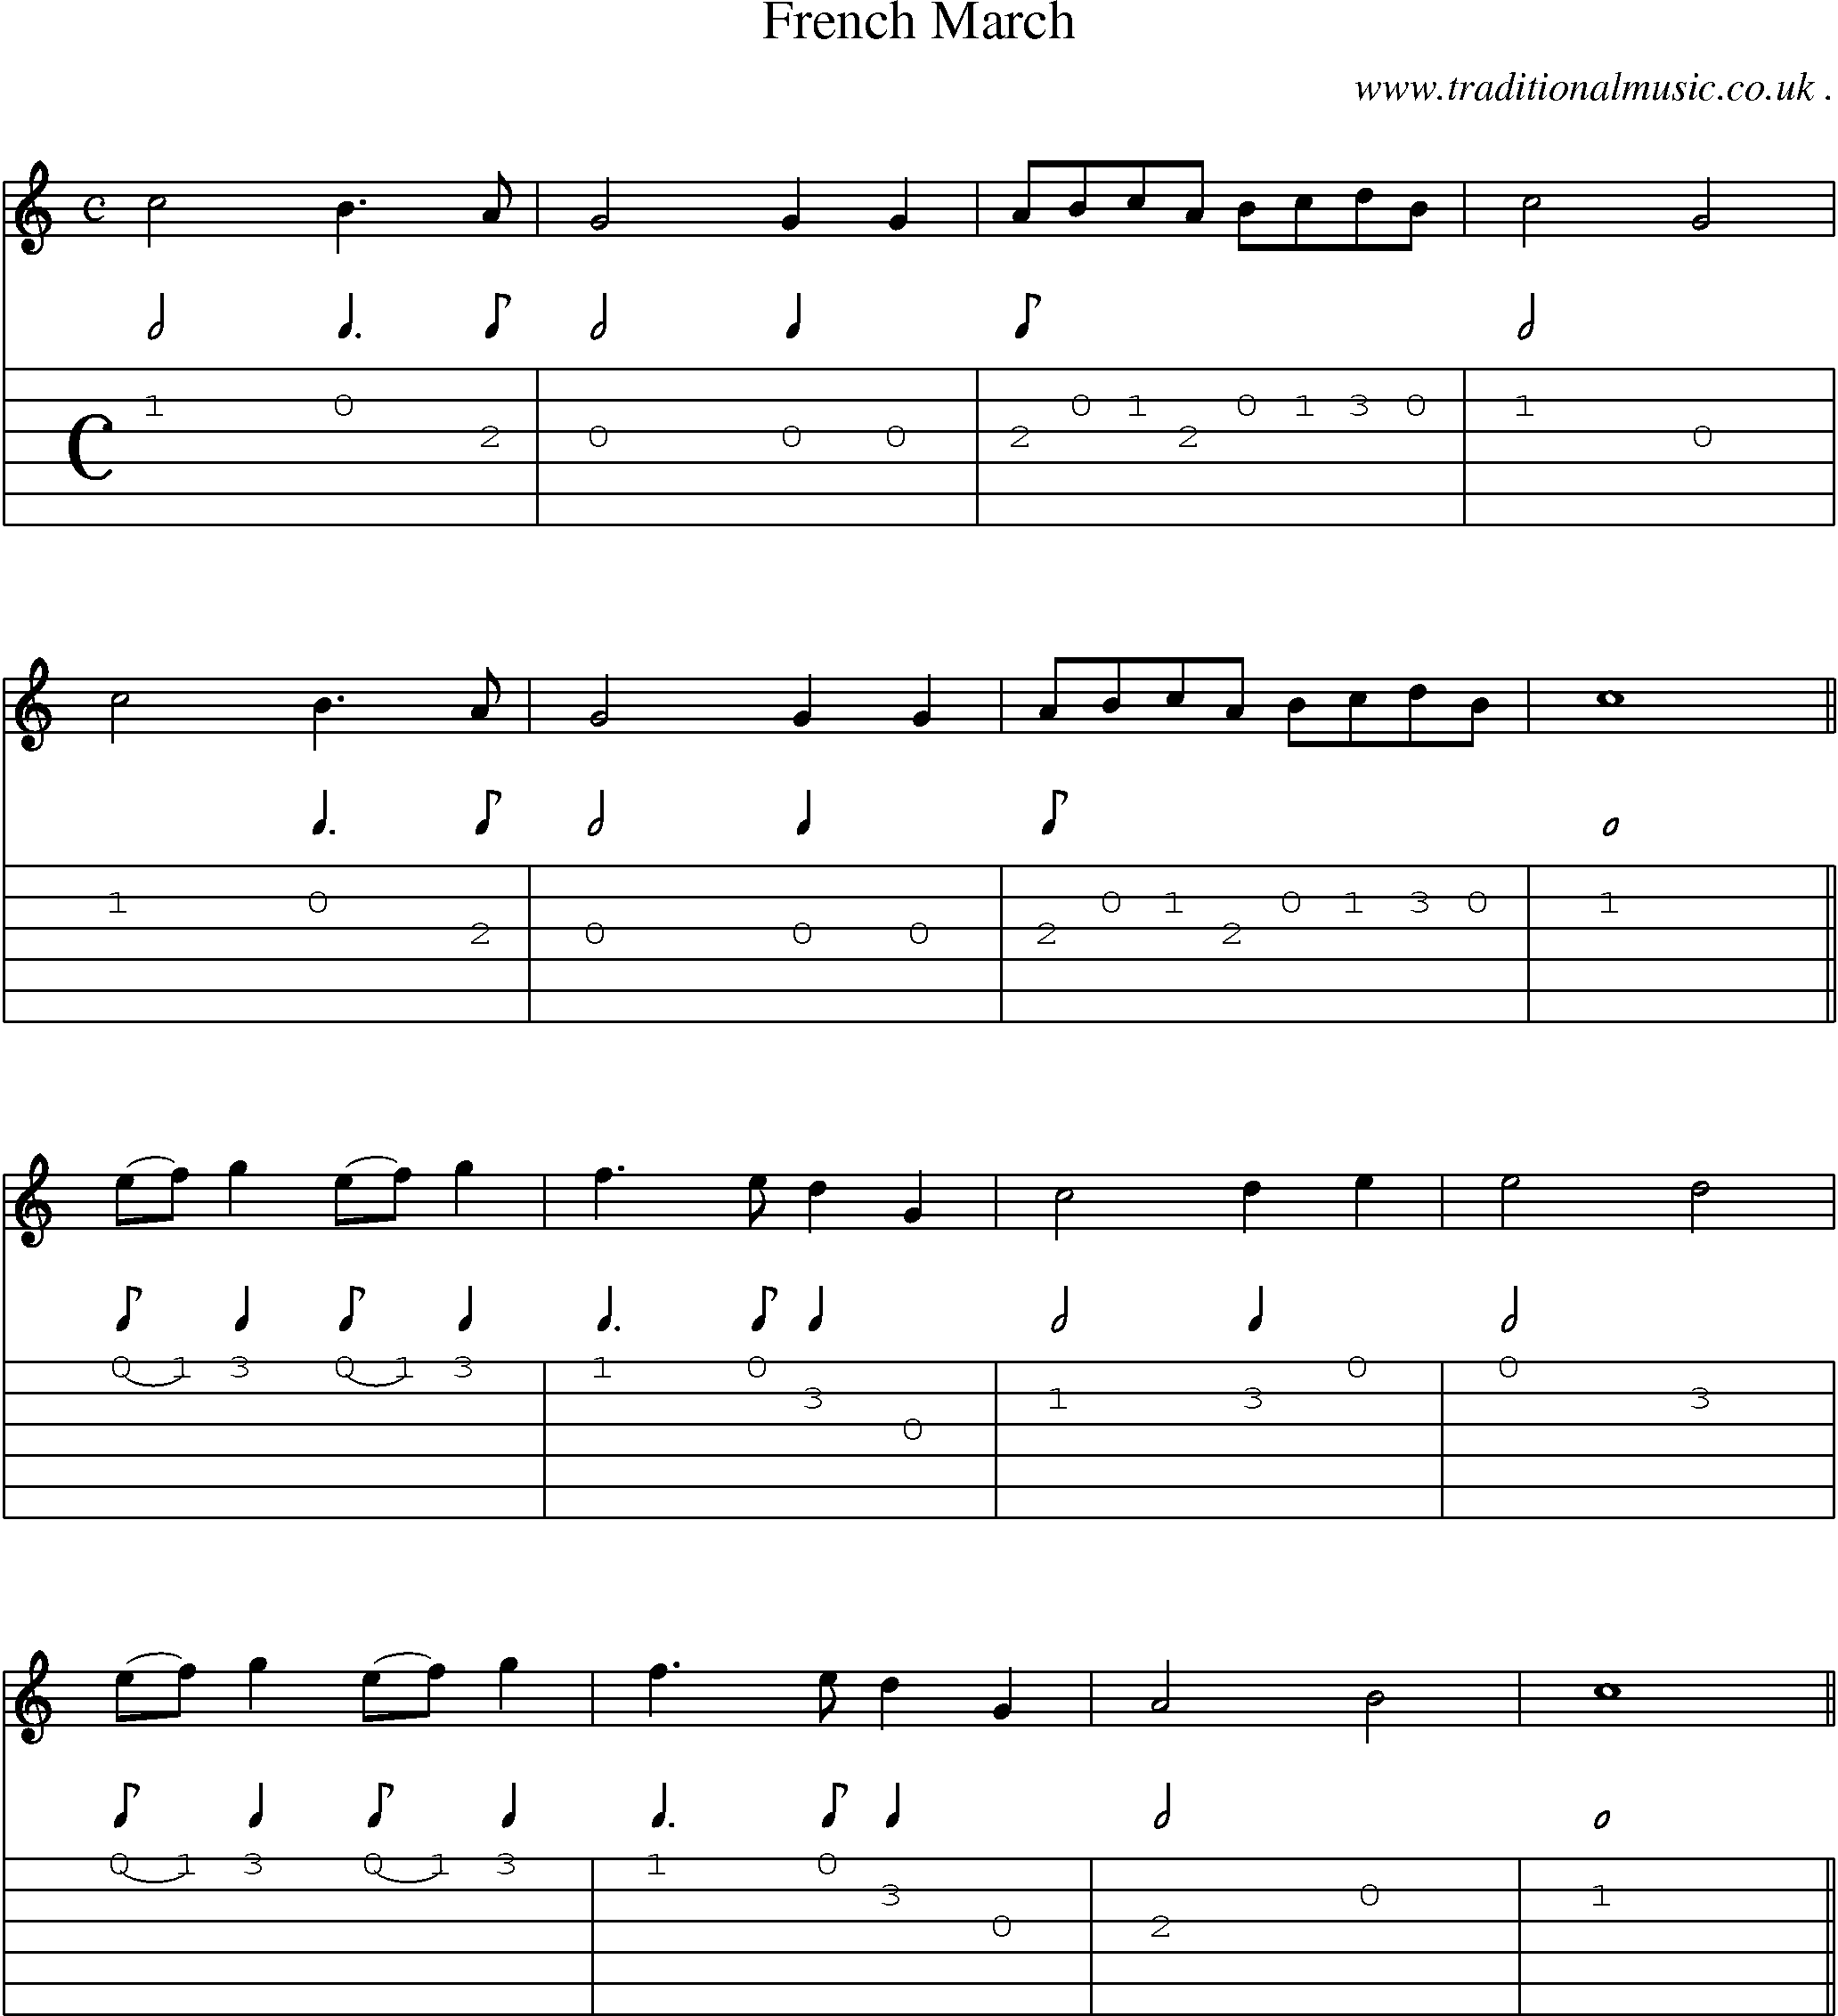 Sheet-Music and Guitar Tabs for French March